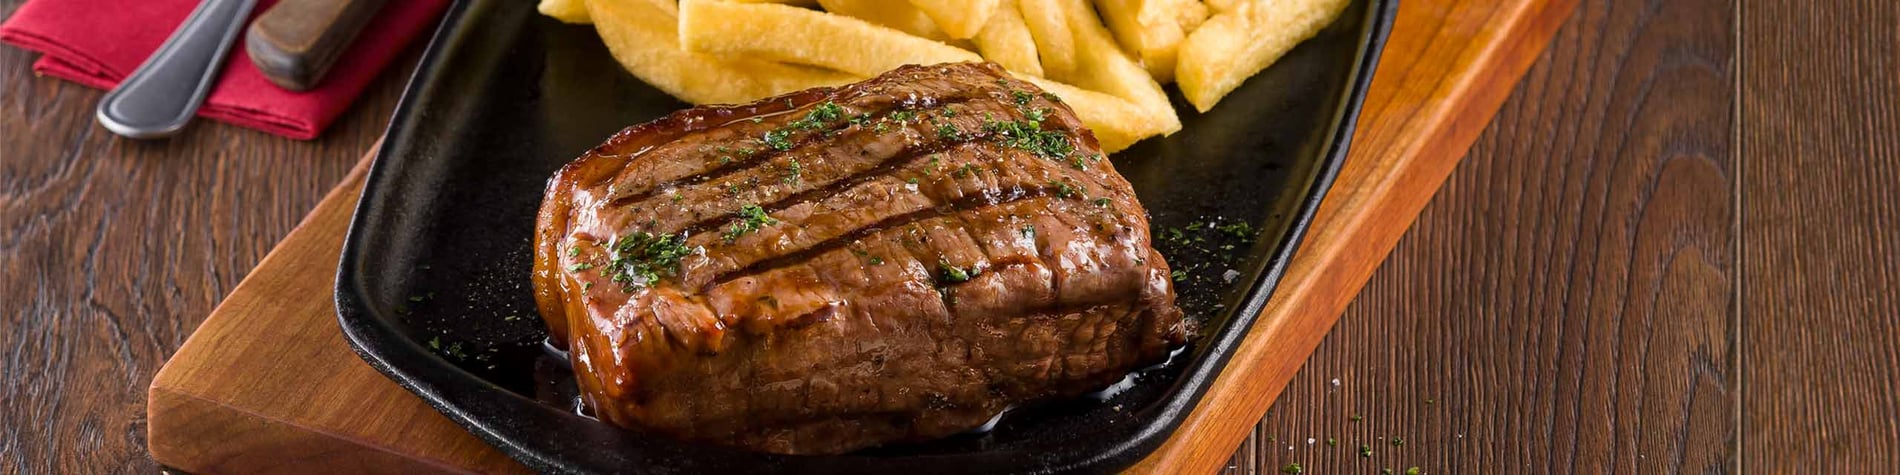 250g sirloin steak with chips served on a wooden board against a wooden background.